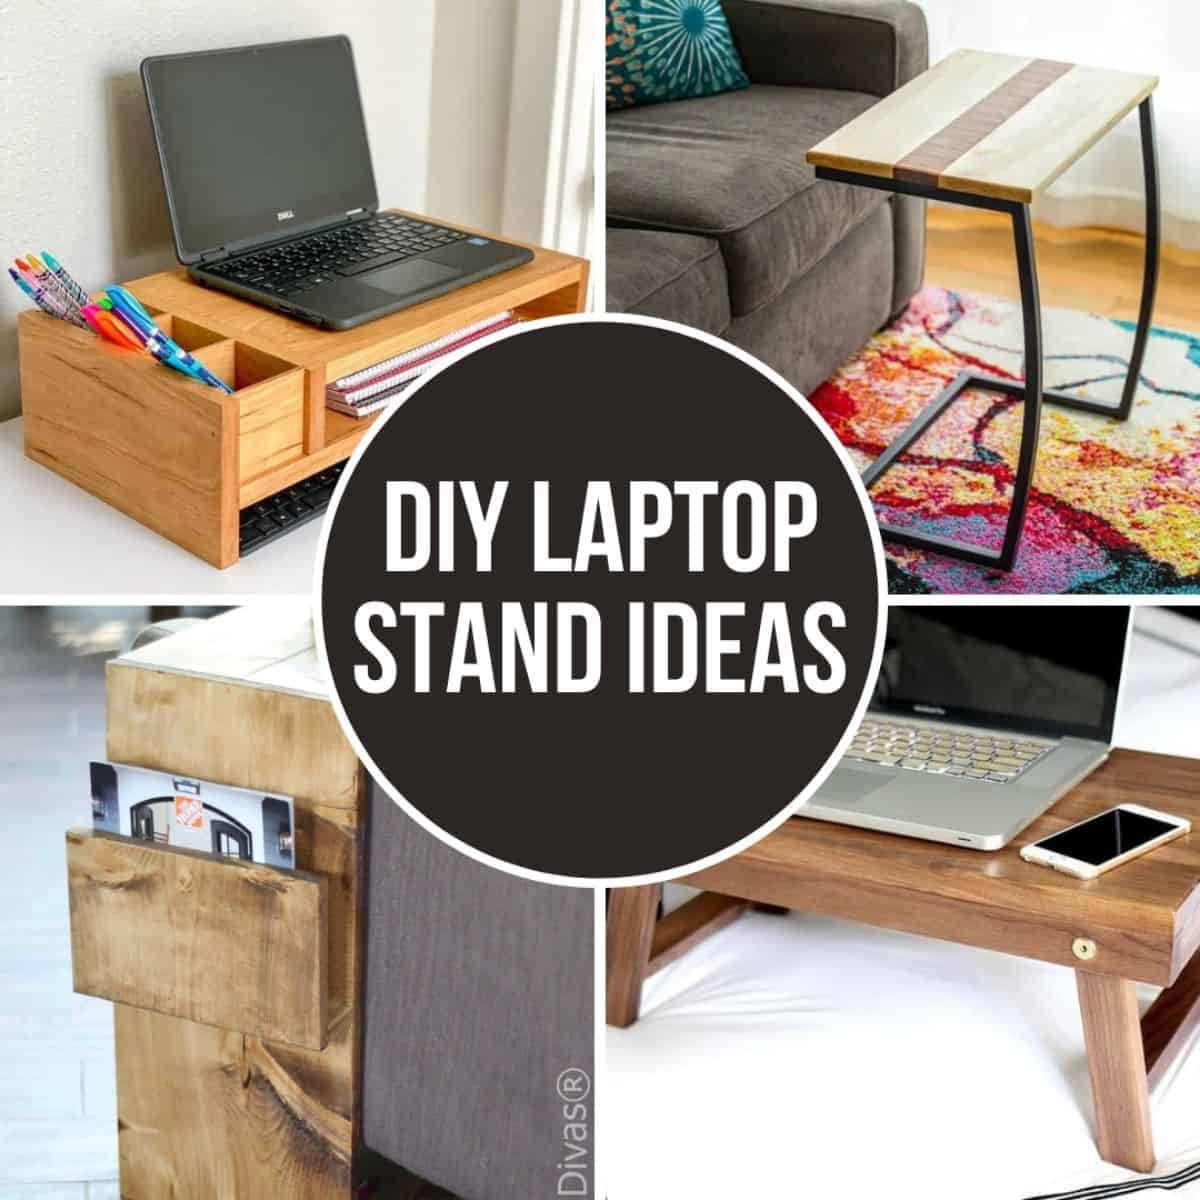 https://www.thehandymansdaughter.com/wp-content/uploads/2022/03/laptop-stand-ideas-The-Handymans-Daughter-1200-sq.jpg